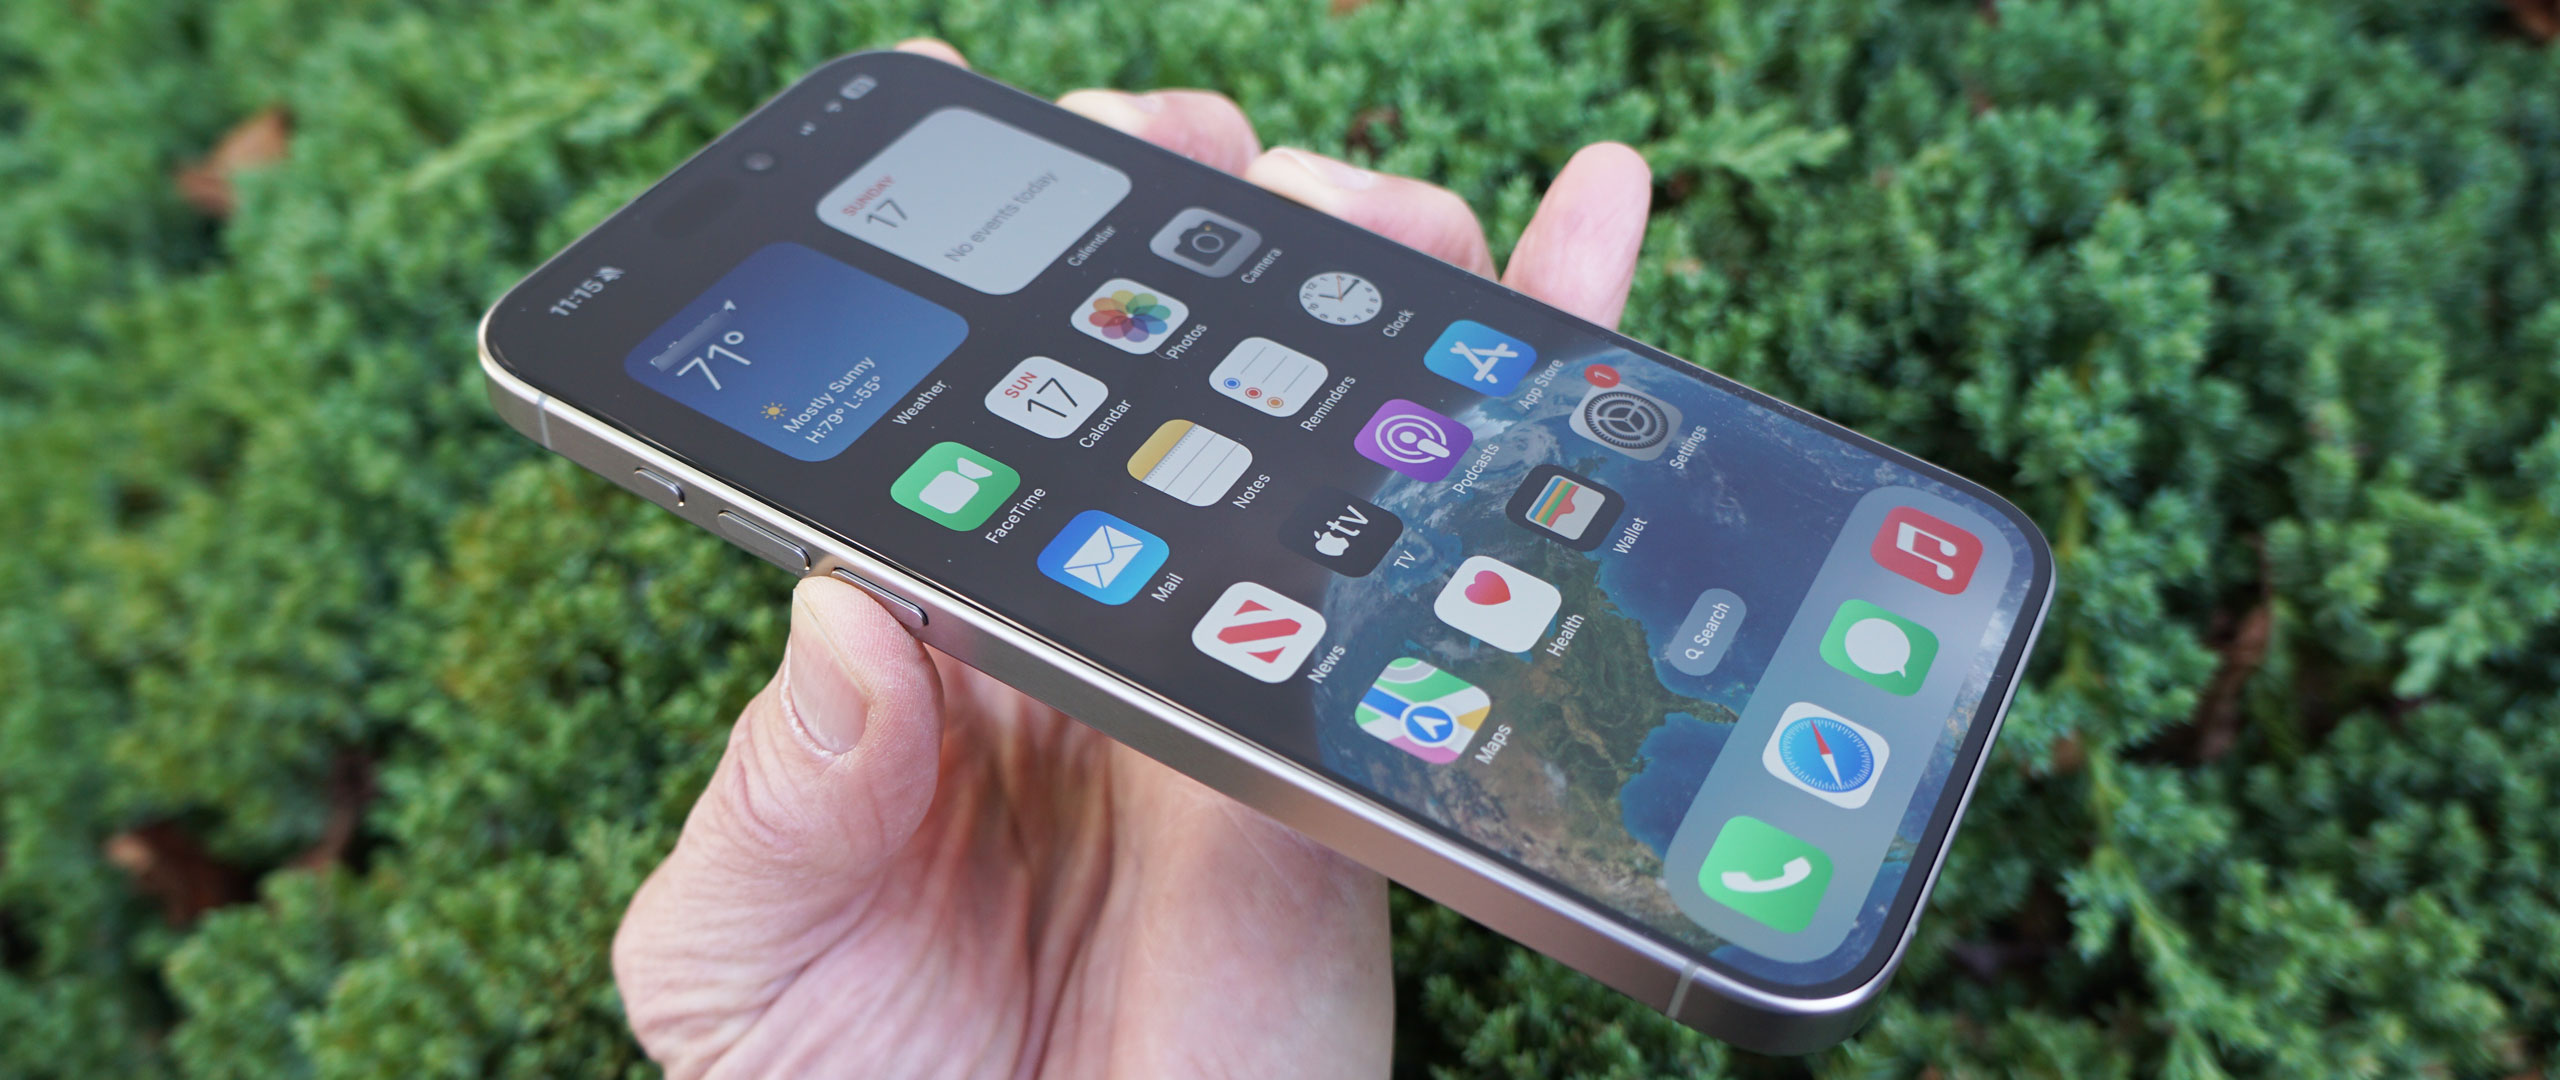 iPhone 15 Pro Max review: Apple's flagship smartphone is full of